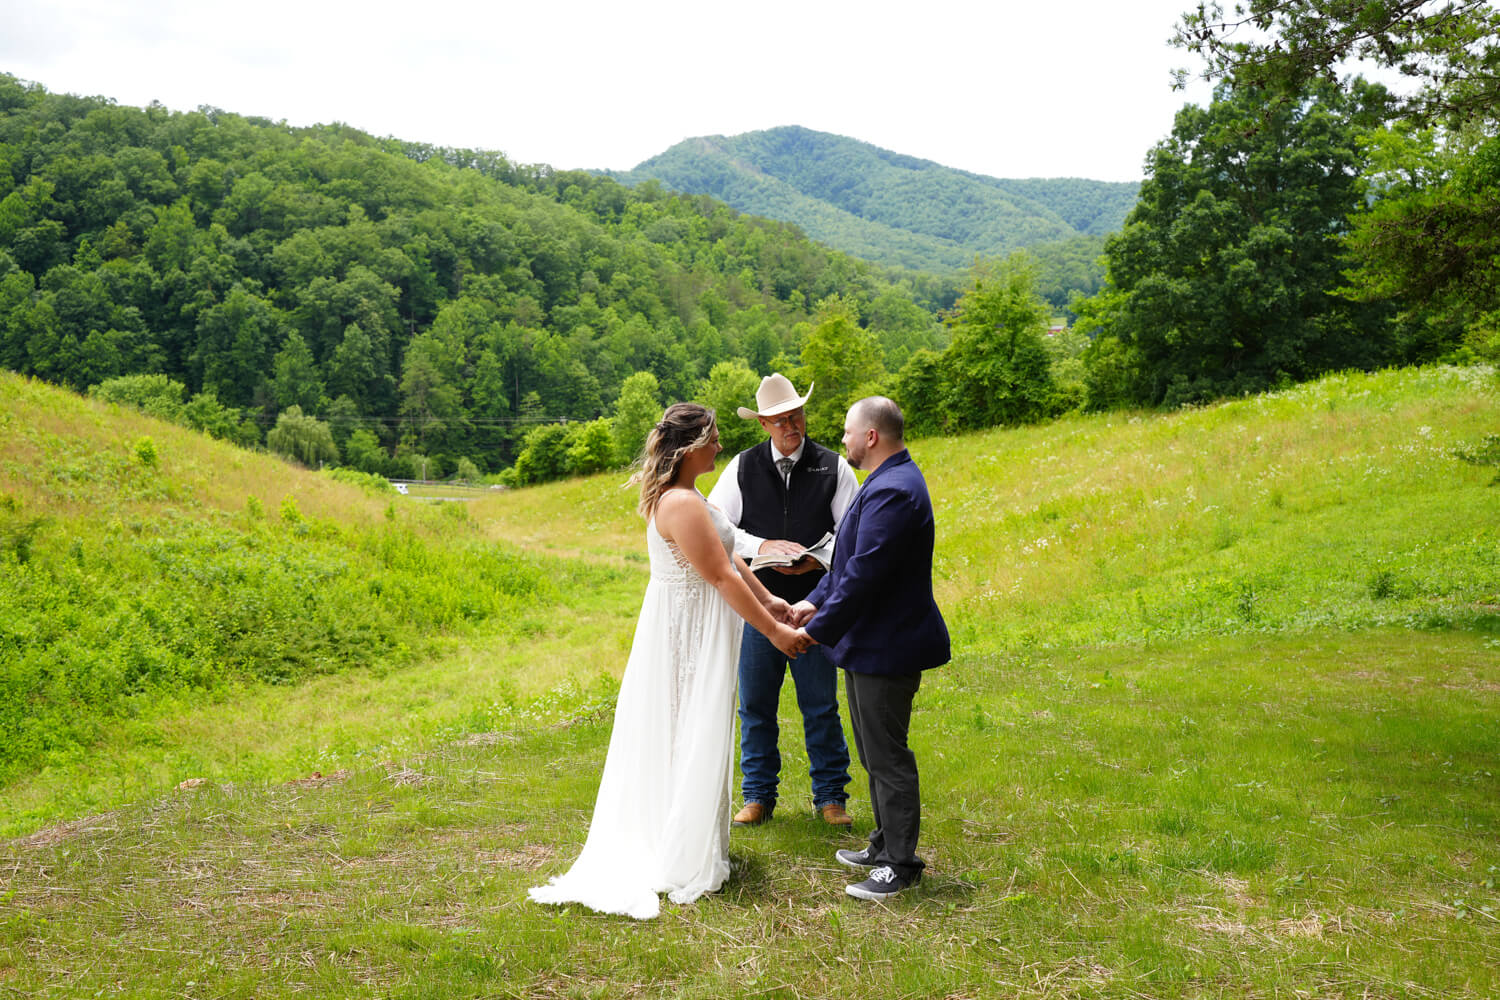 Western style minister in a cowboy hat marrying a couple in a field with a mountain behind them at Honeysuckle Hills near Gatlinburg TN